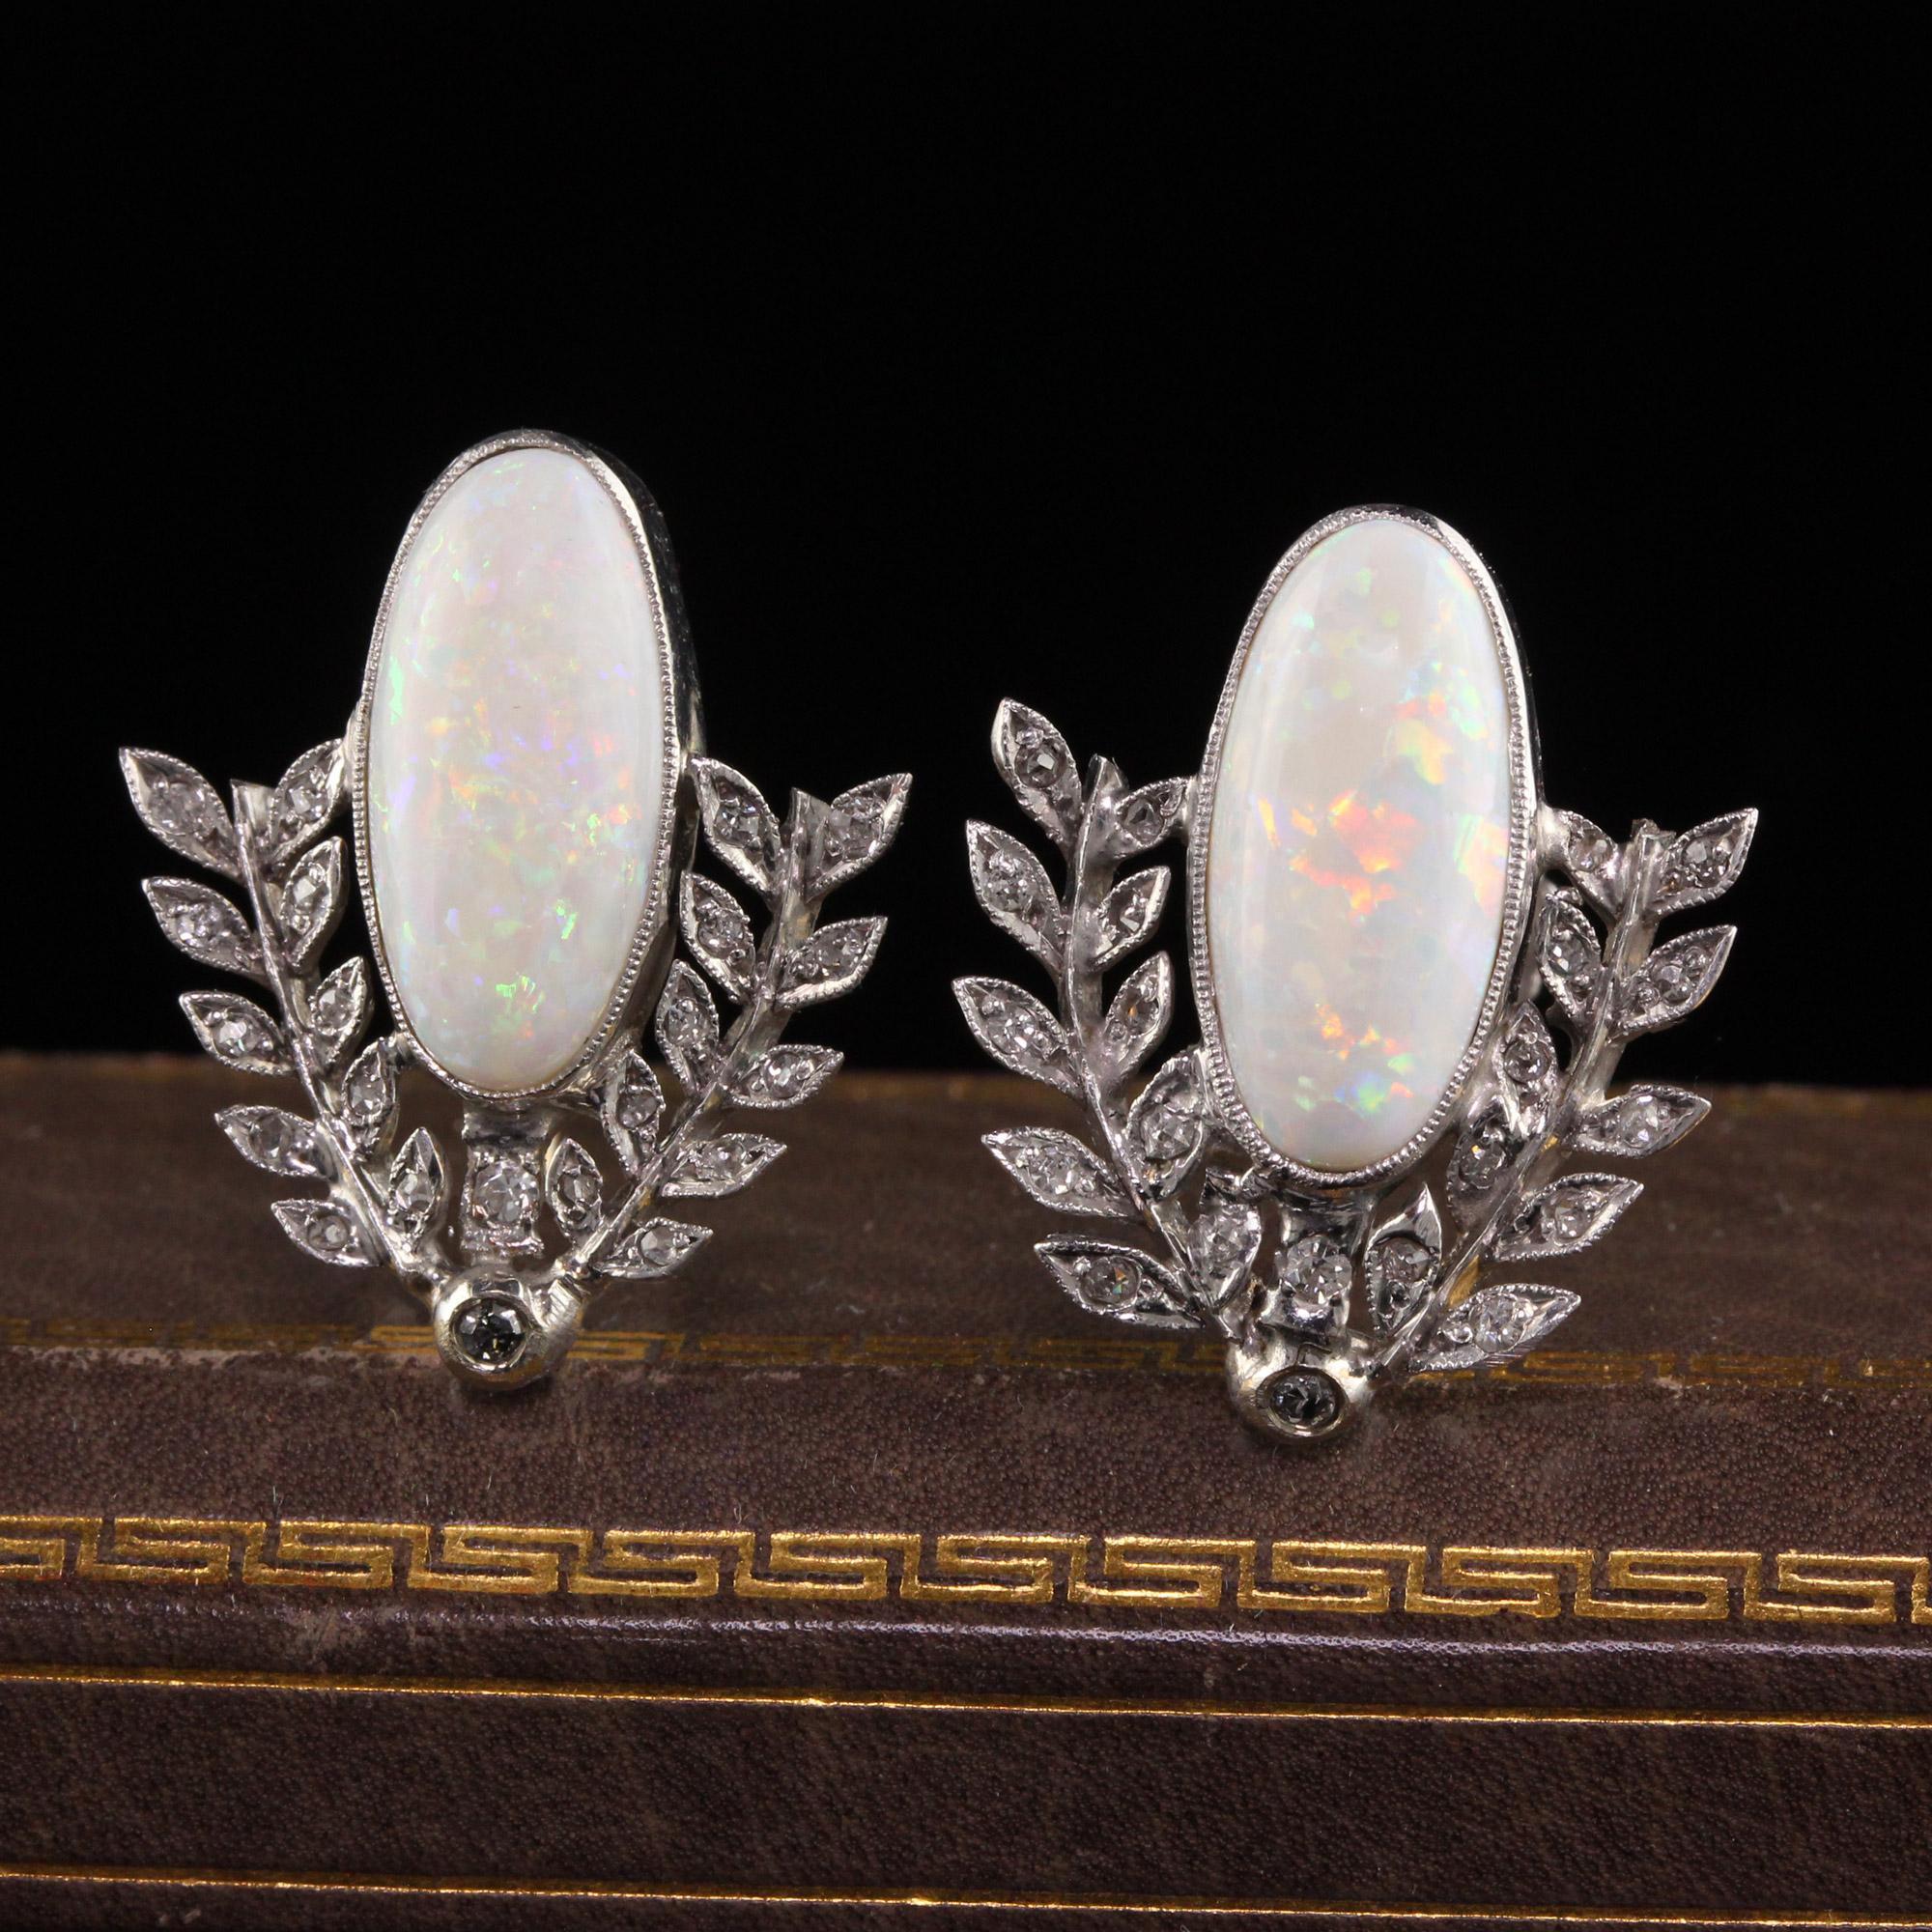 Beautiful Antique Art Deco 18K White Gold Opal and Diamond Wreath Earrings. This beautiful pair of earrings are crafted in 10k and 18k white gold. The earrings hold beautiful oval cabochon opals with a gorgeous play of color and surrounded by rose